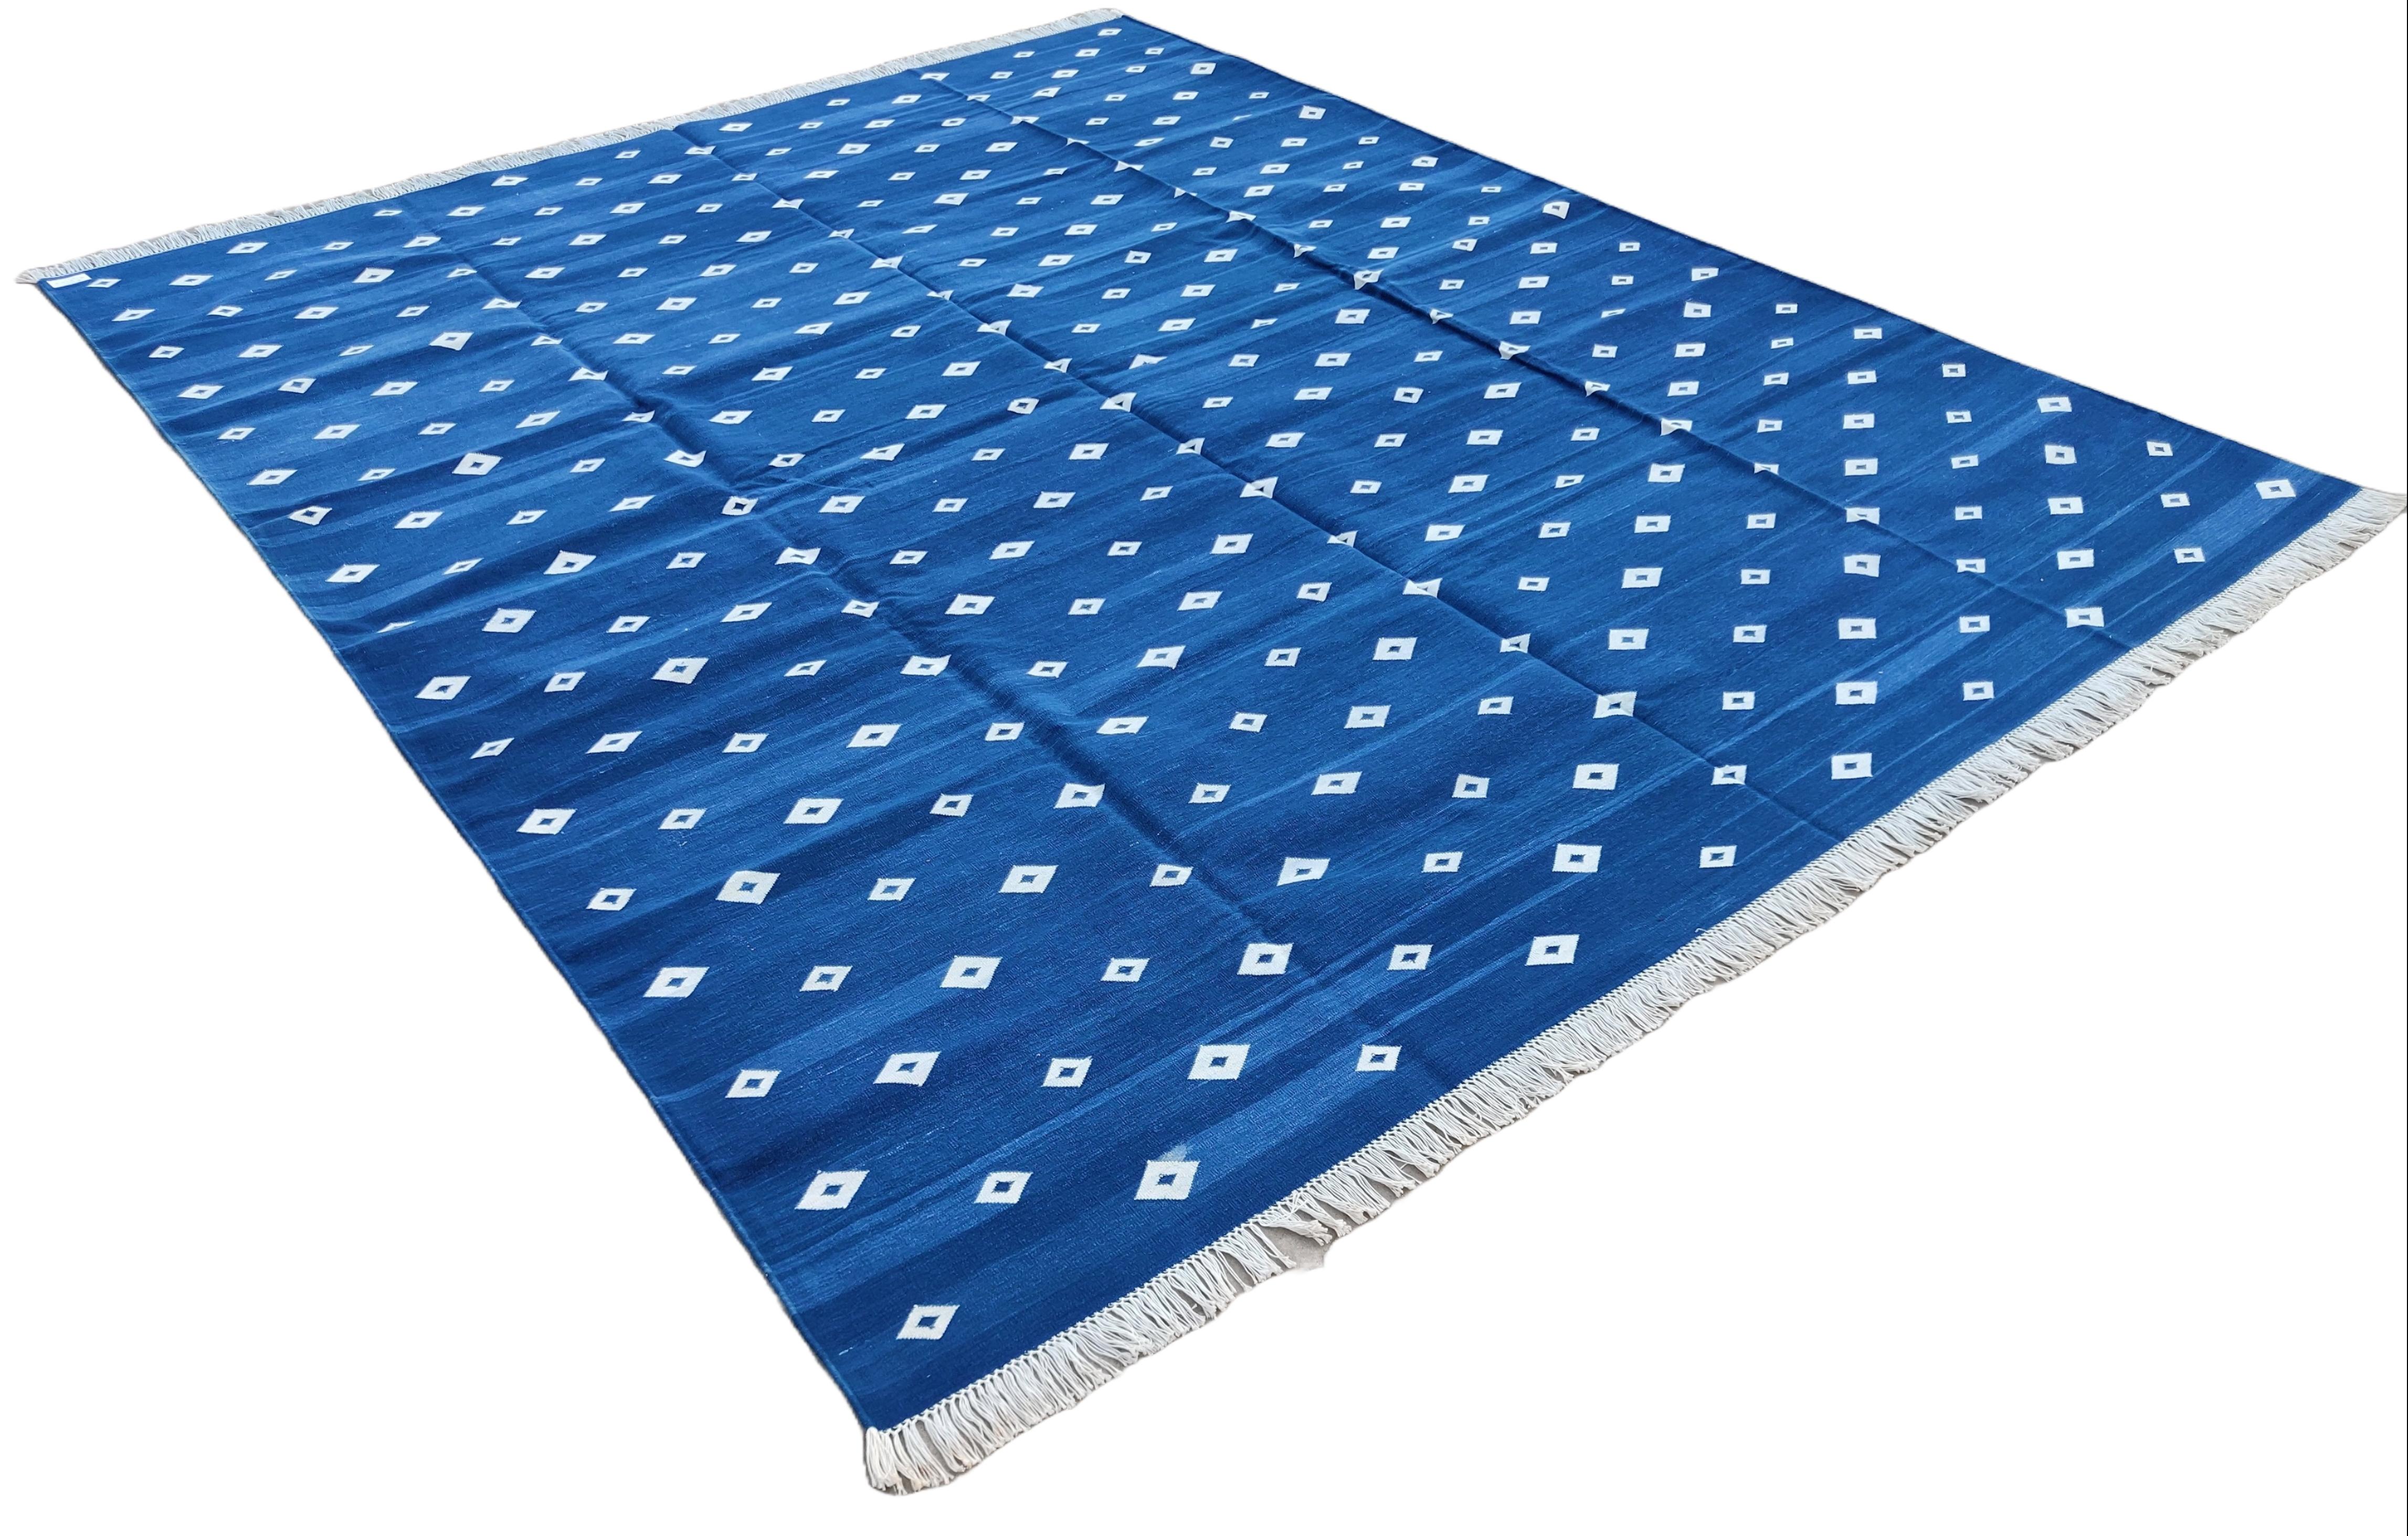 Cotton Natural Vegetable Dyed, Indigo Blue & White Diamond Patterned Rug-8'x10'
These special flat-weave dhurries are hand-woven with 15 ply 100% cotton yarn. Due to the special manufacturing techniques used to create our rugs, the size and color of